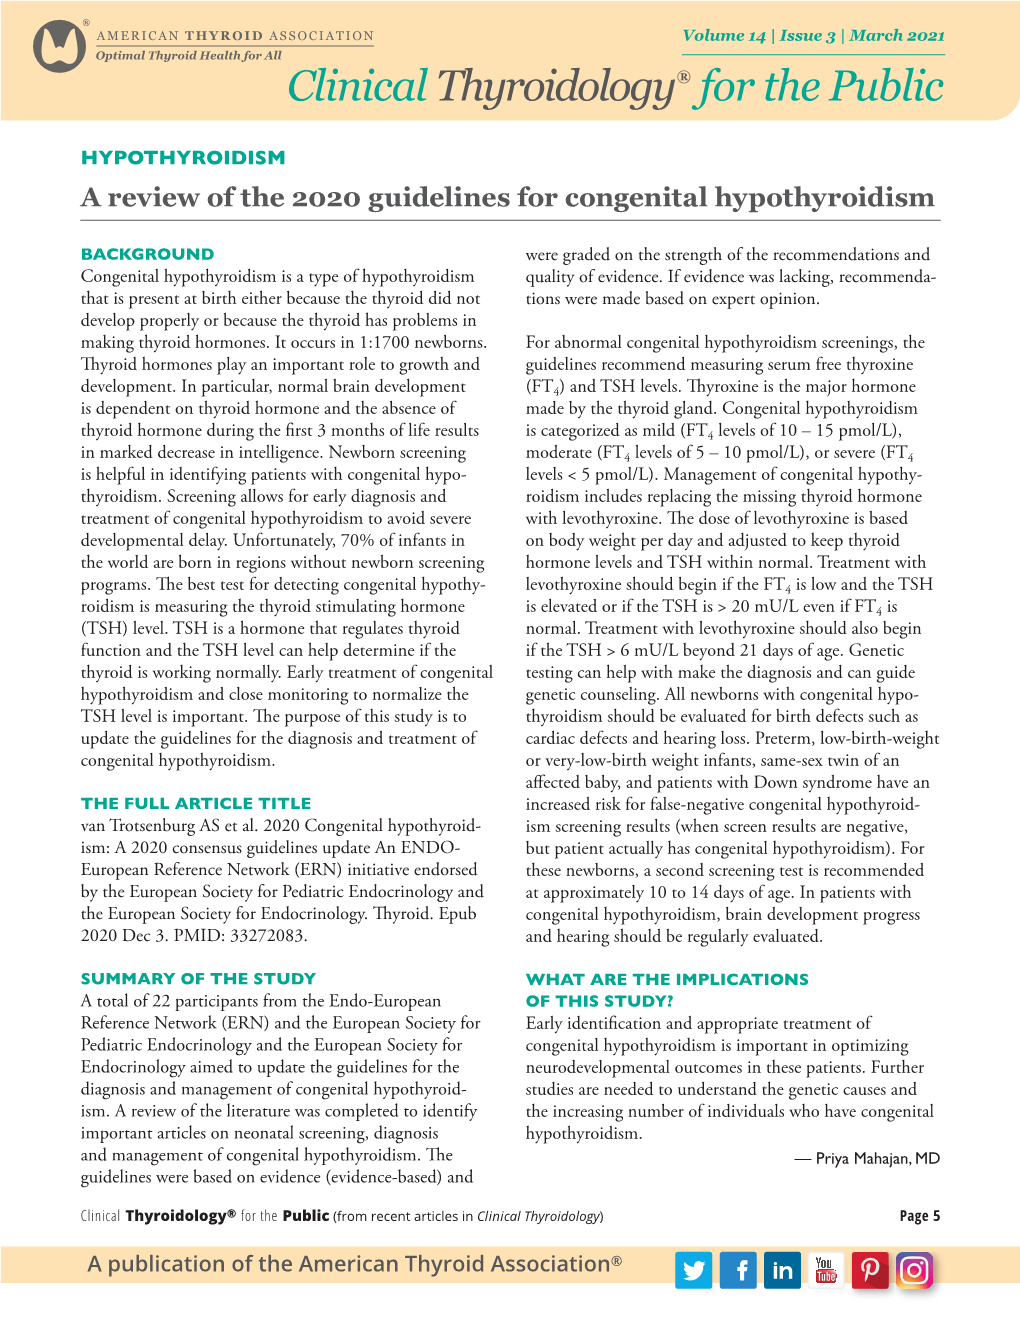 A Review of the 2020 Guidelines for Congenital Hypothyroidism